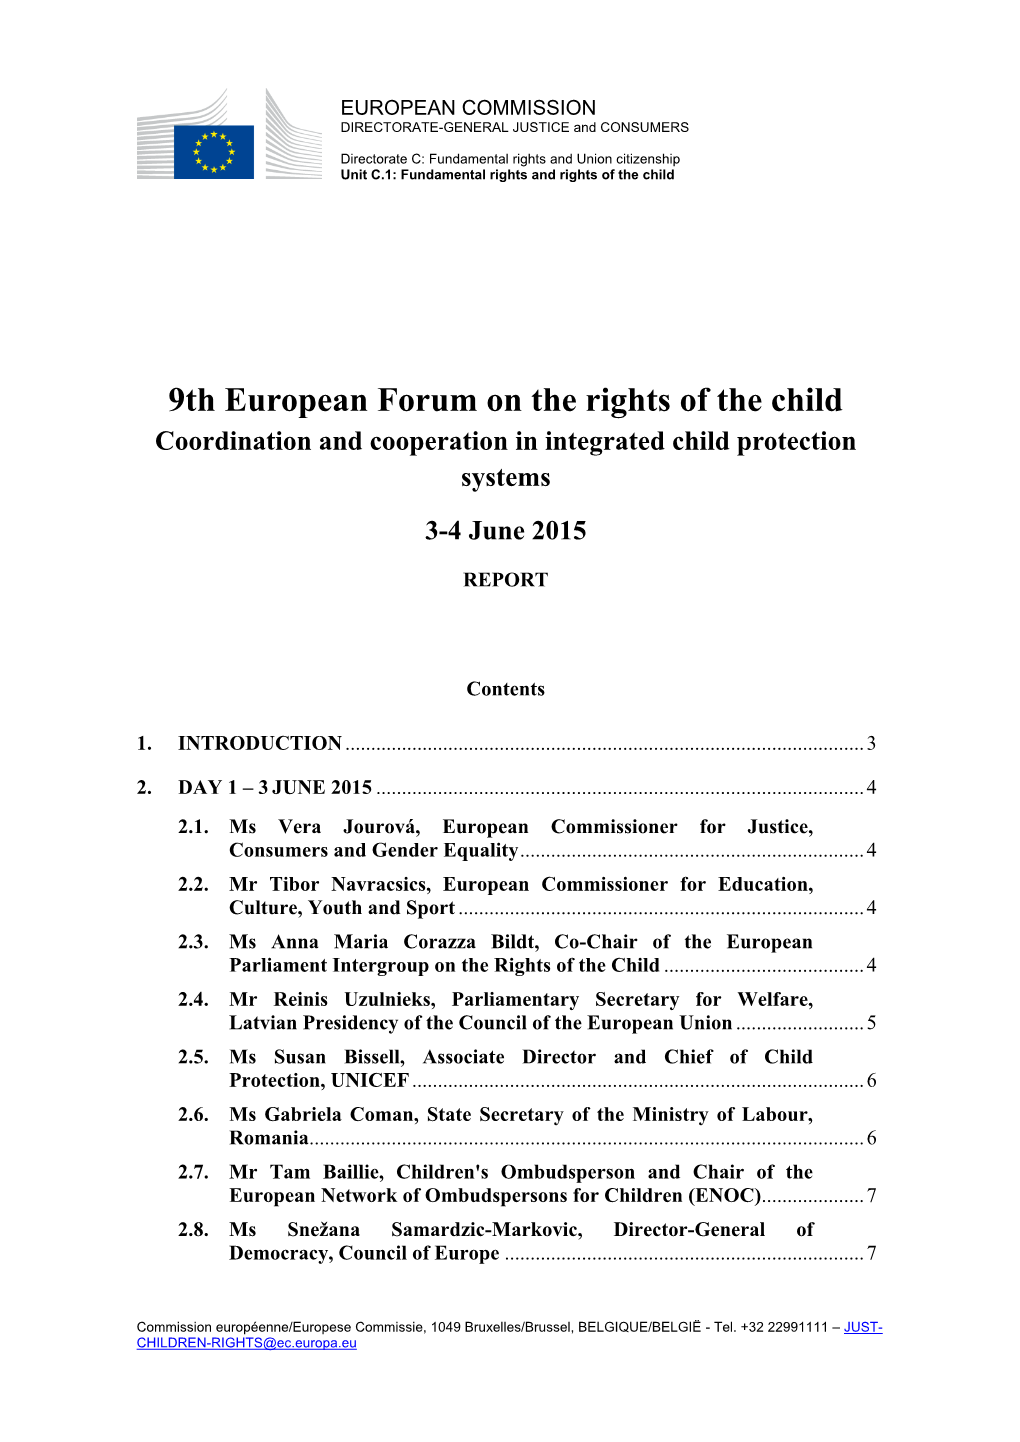 9Th European Forum on the Rights of the Child Coordination and Cooperation in Integrated Child Protection Systems 3-4 June 2015